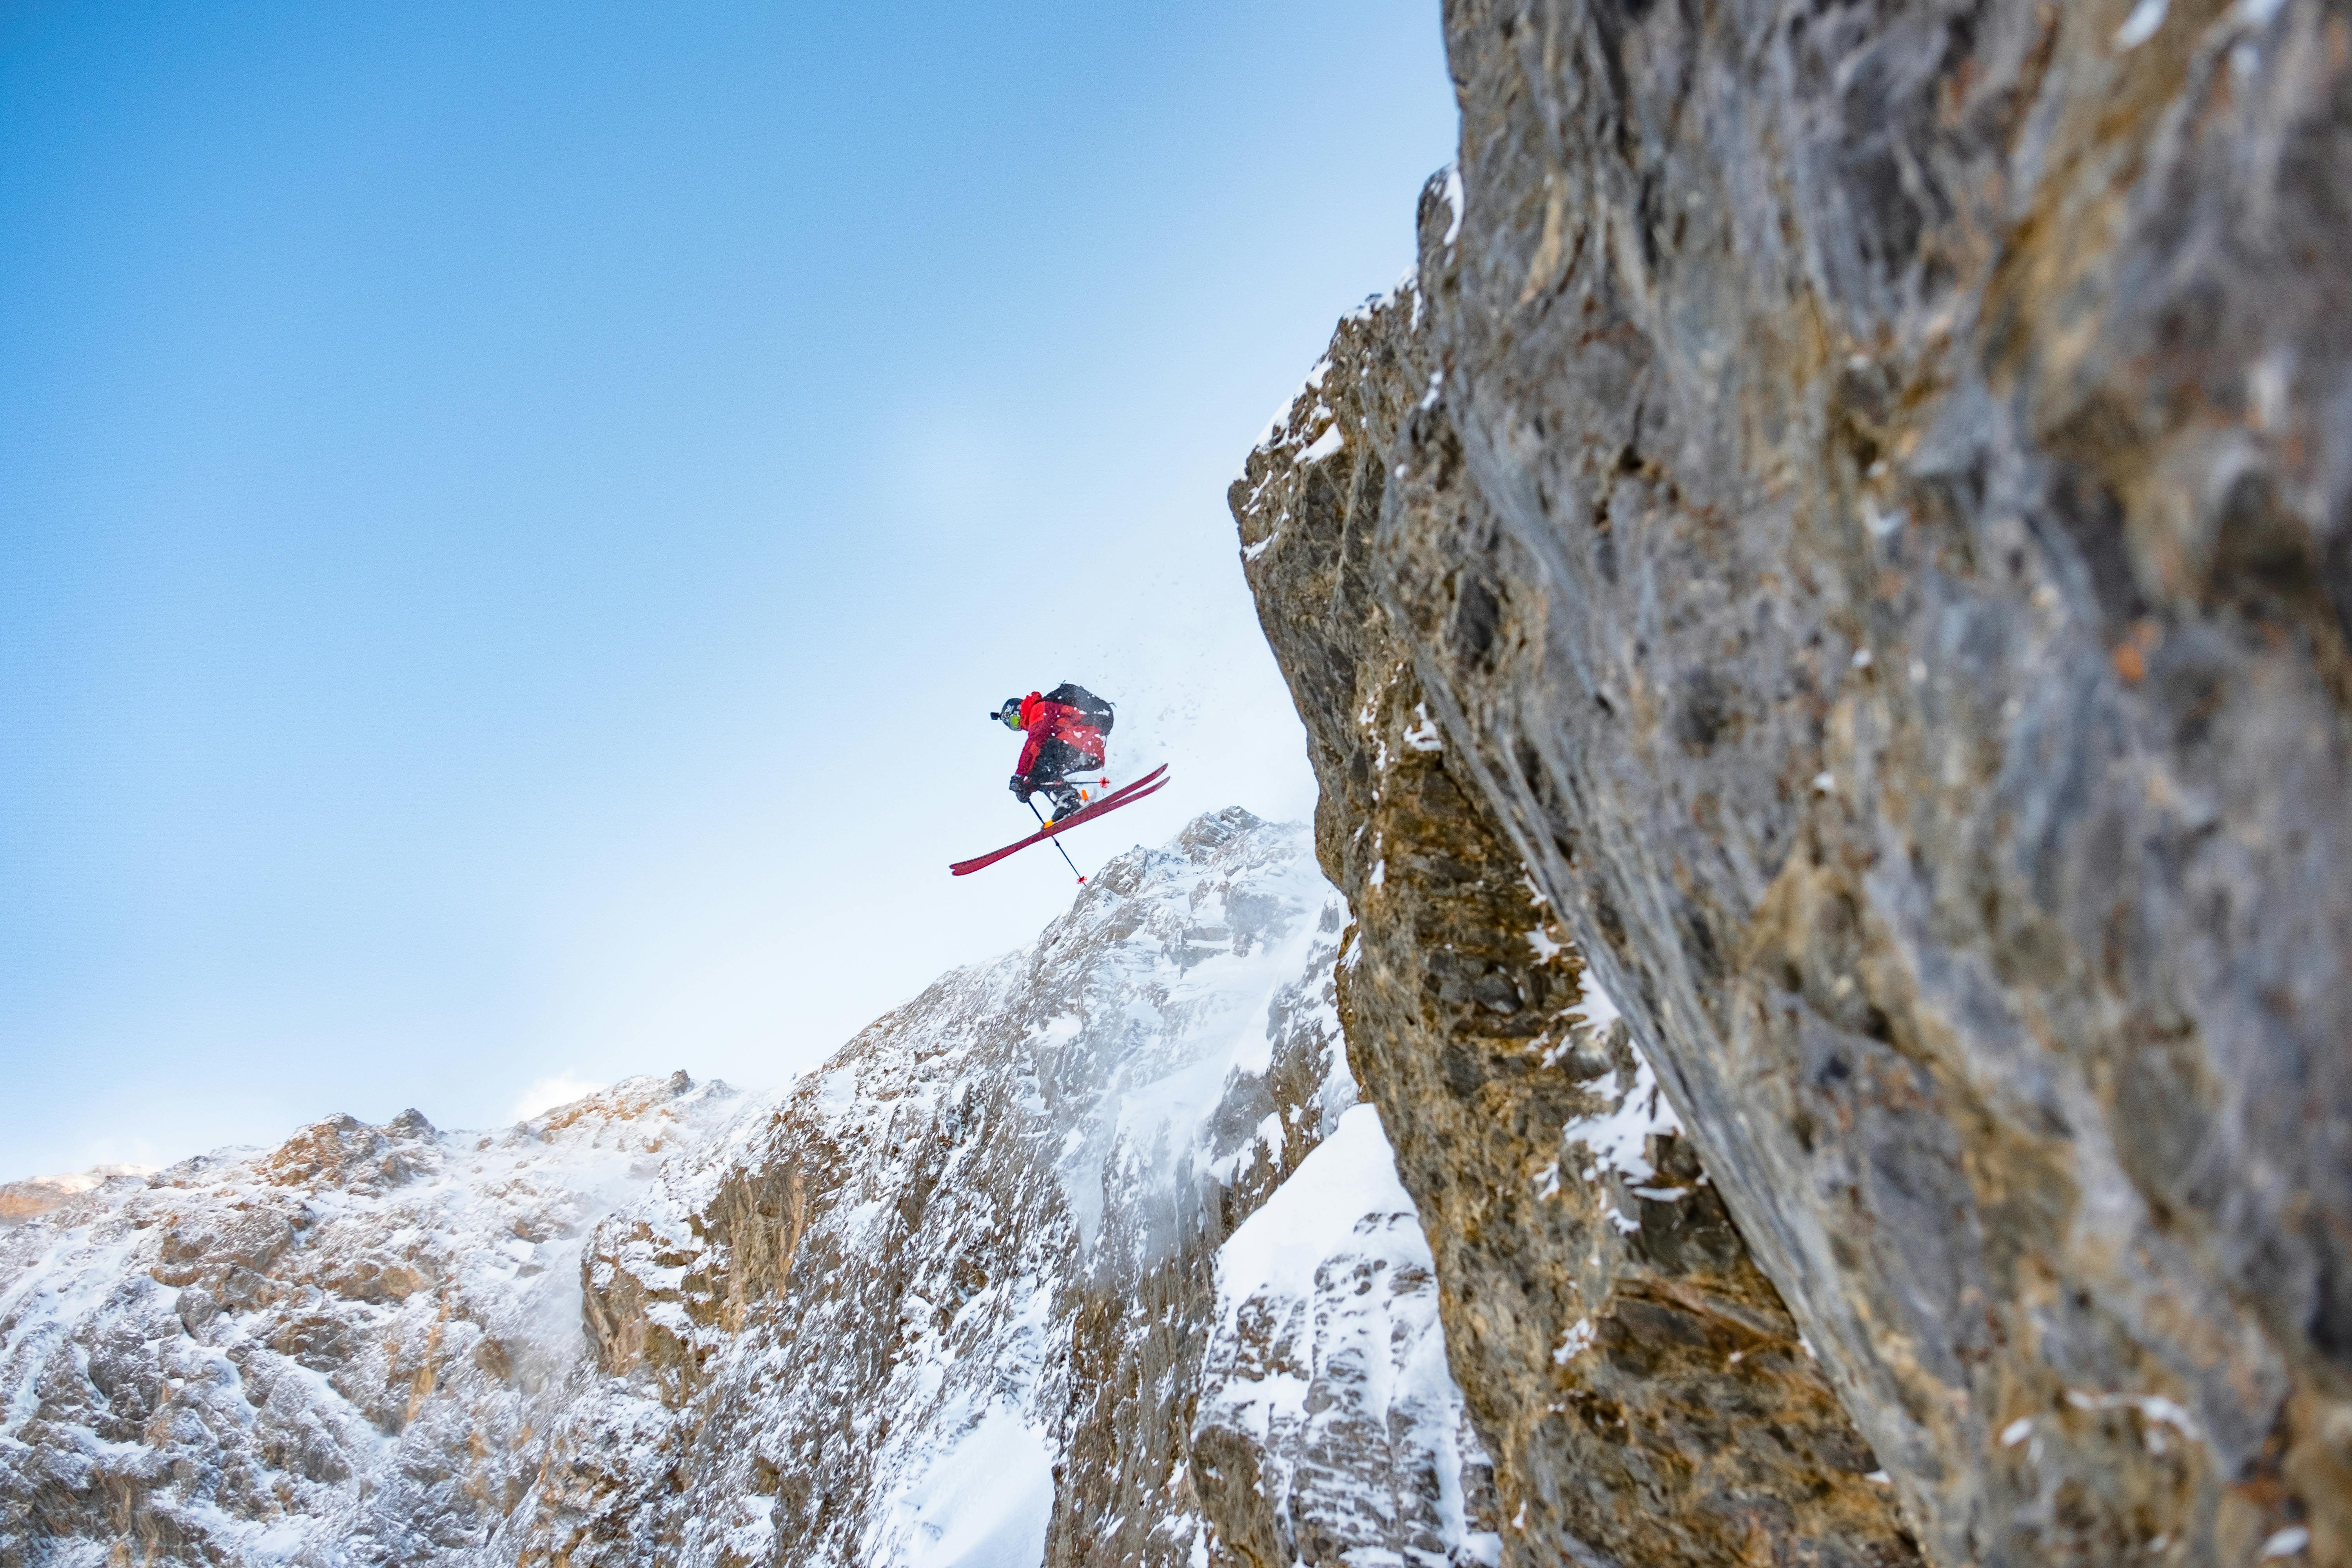 A skier jumping off a rocky cliff